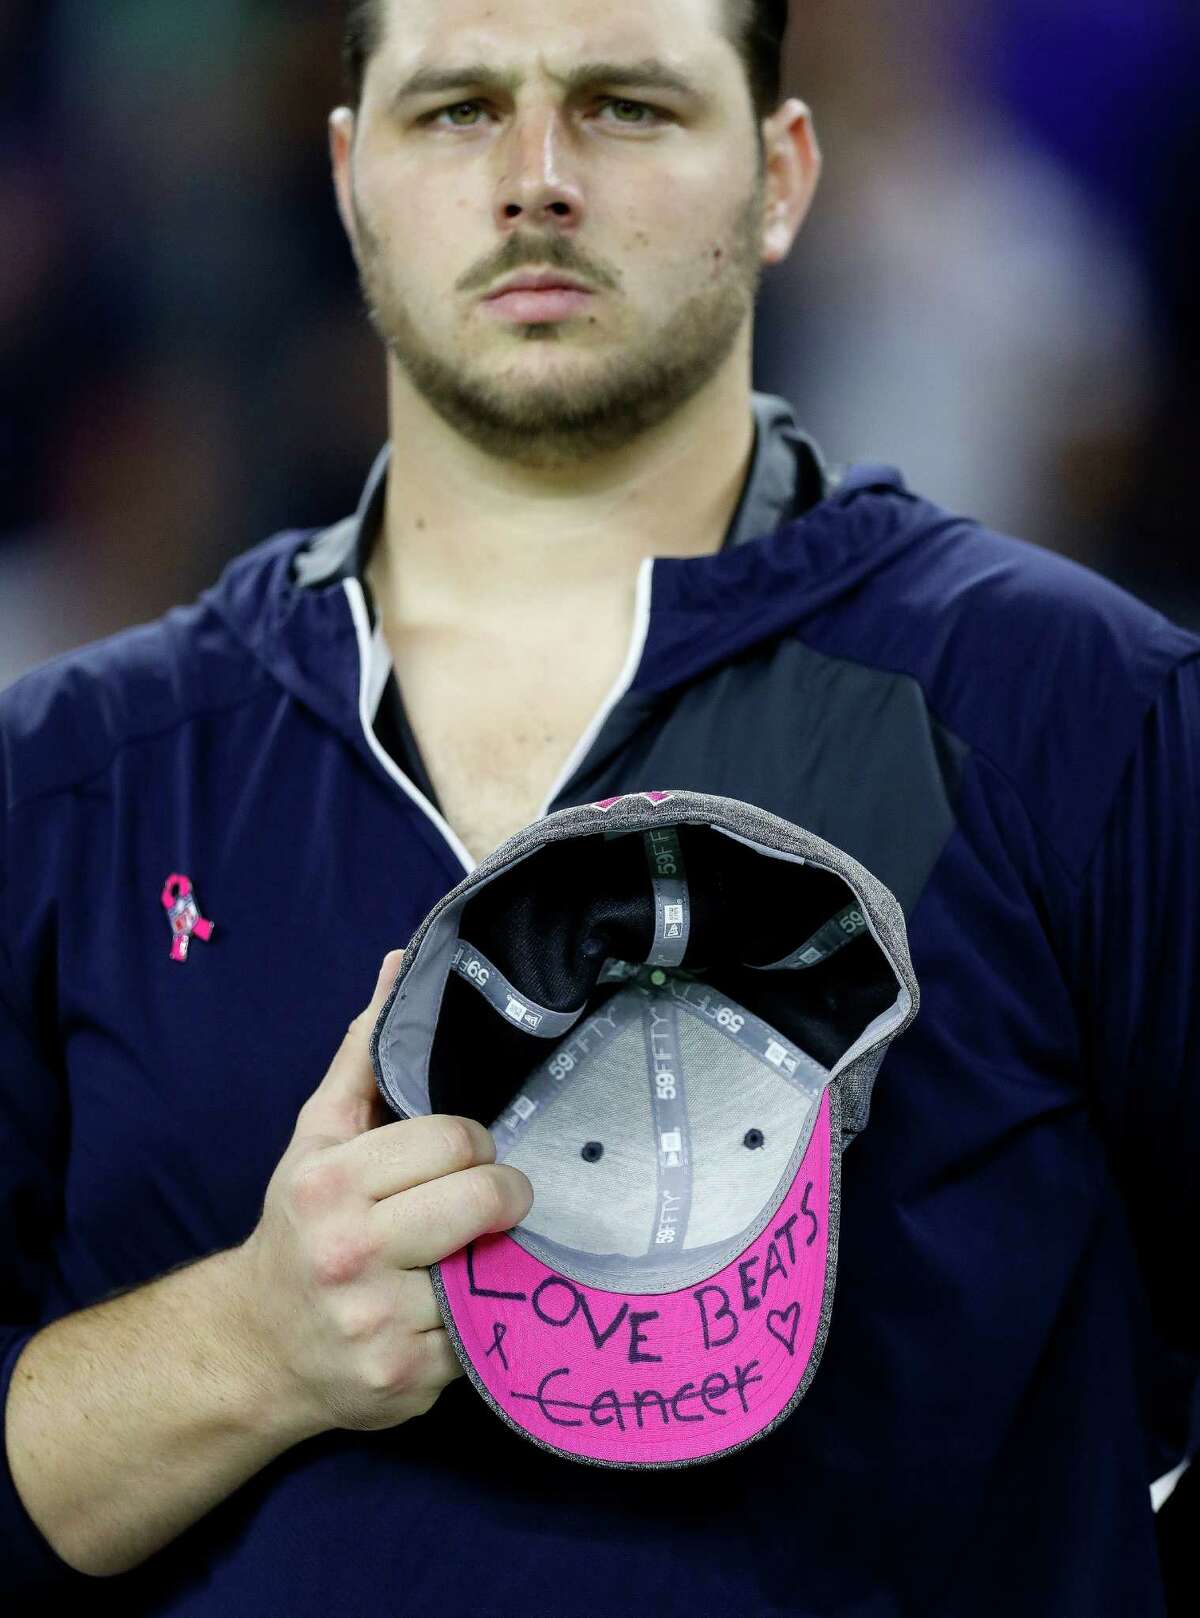 Houston Texans David Quessenberry holds a ball cap with "Love beats Cancer" on it during the National Anthem during the first quarter of an NFL football game at NRG Stadium, Sunday,Oct. 16, 2016 in Houston. Quessenberry has beaten non-Hodgkin T-lymphoblastic lymphoma. ( Karen Warren / Houston Chronicle )